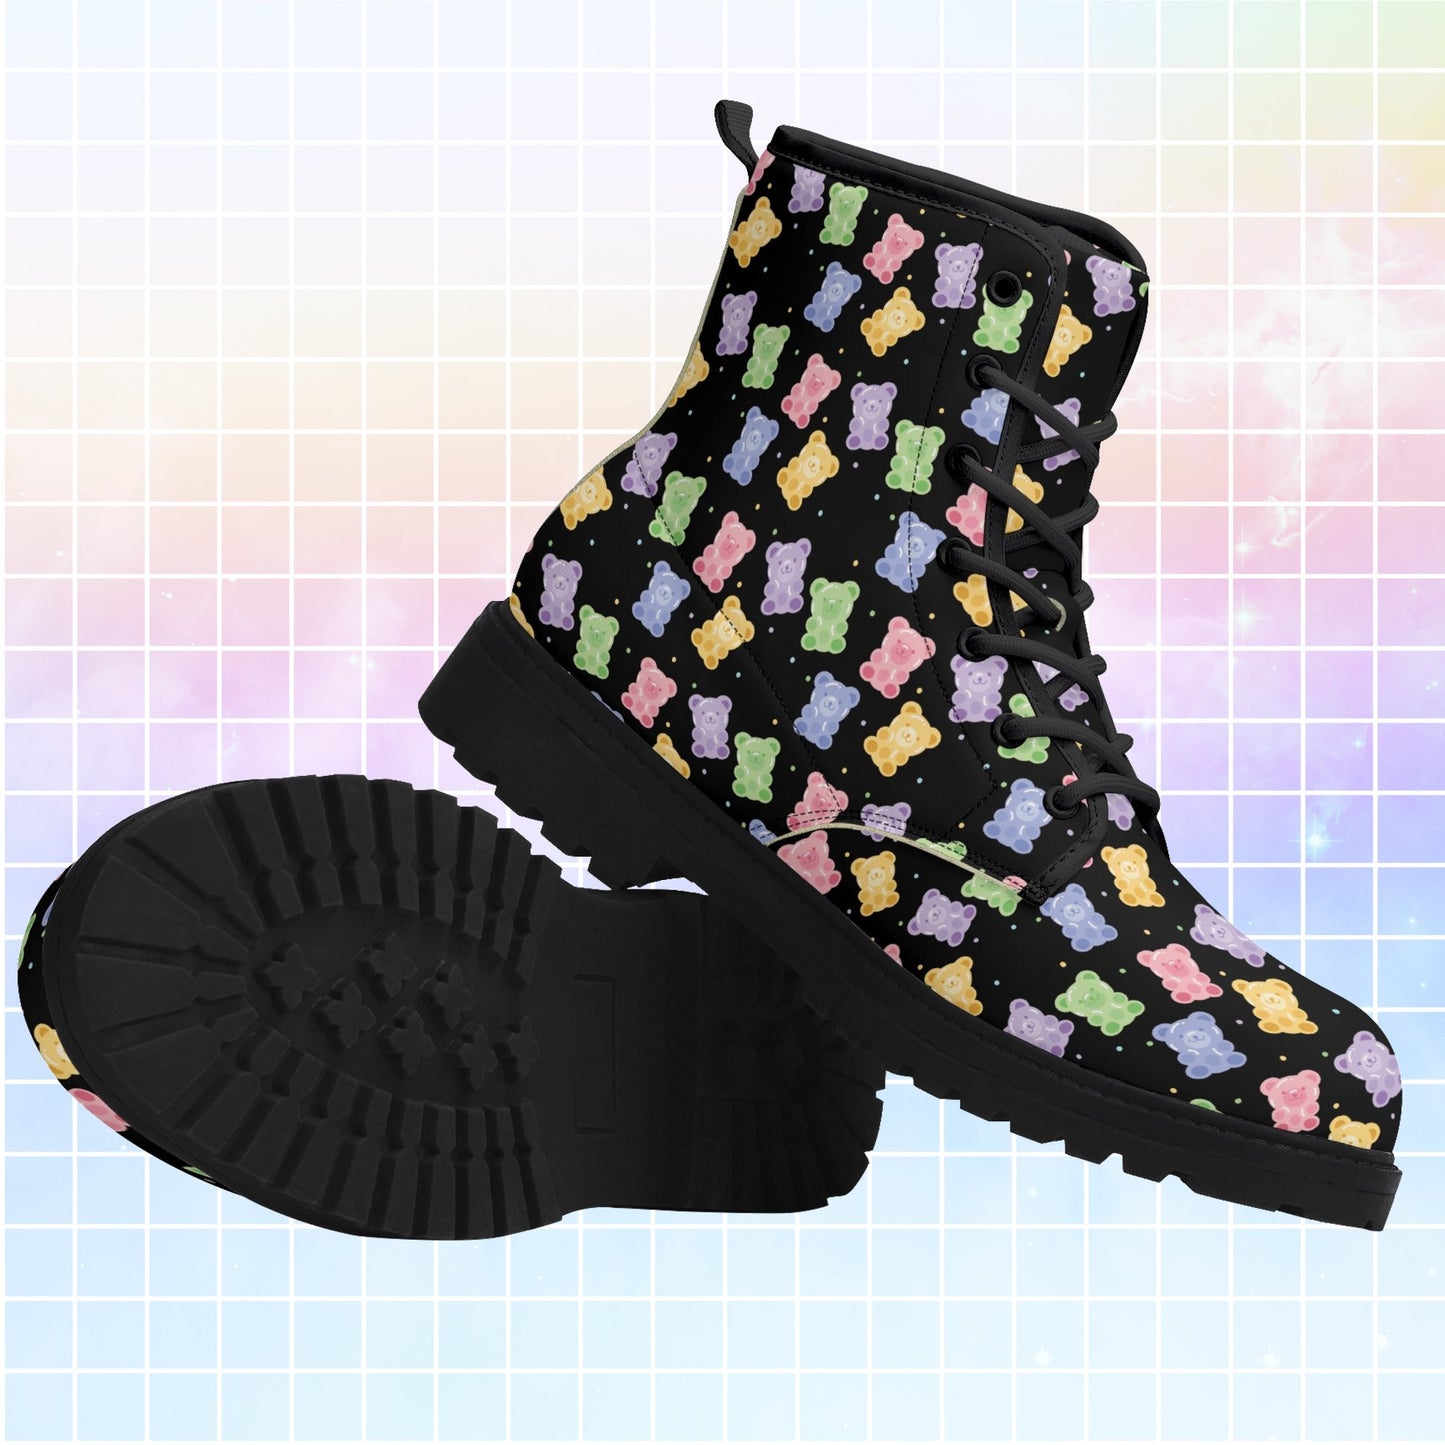 Cute Gummy Bears Pattern Womens Sizes Leather Boots